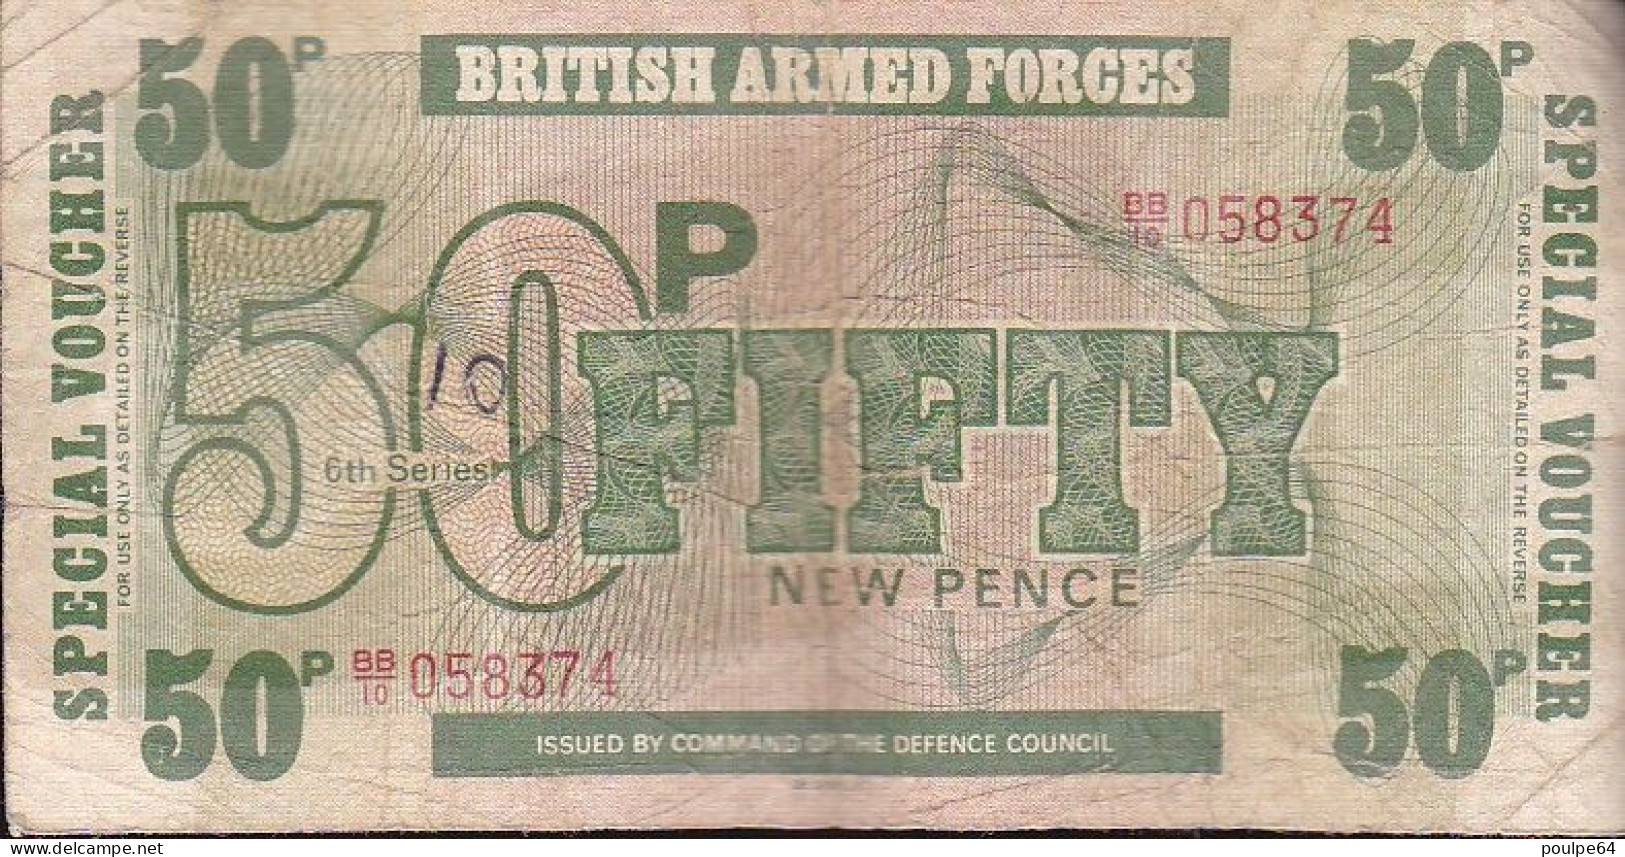 50 Pence  - British Armed Forges - 50 Pounds